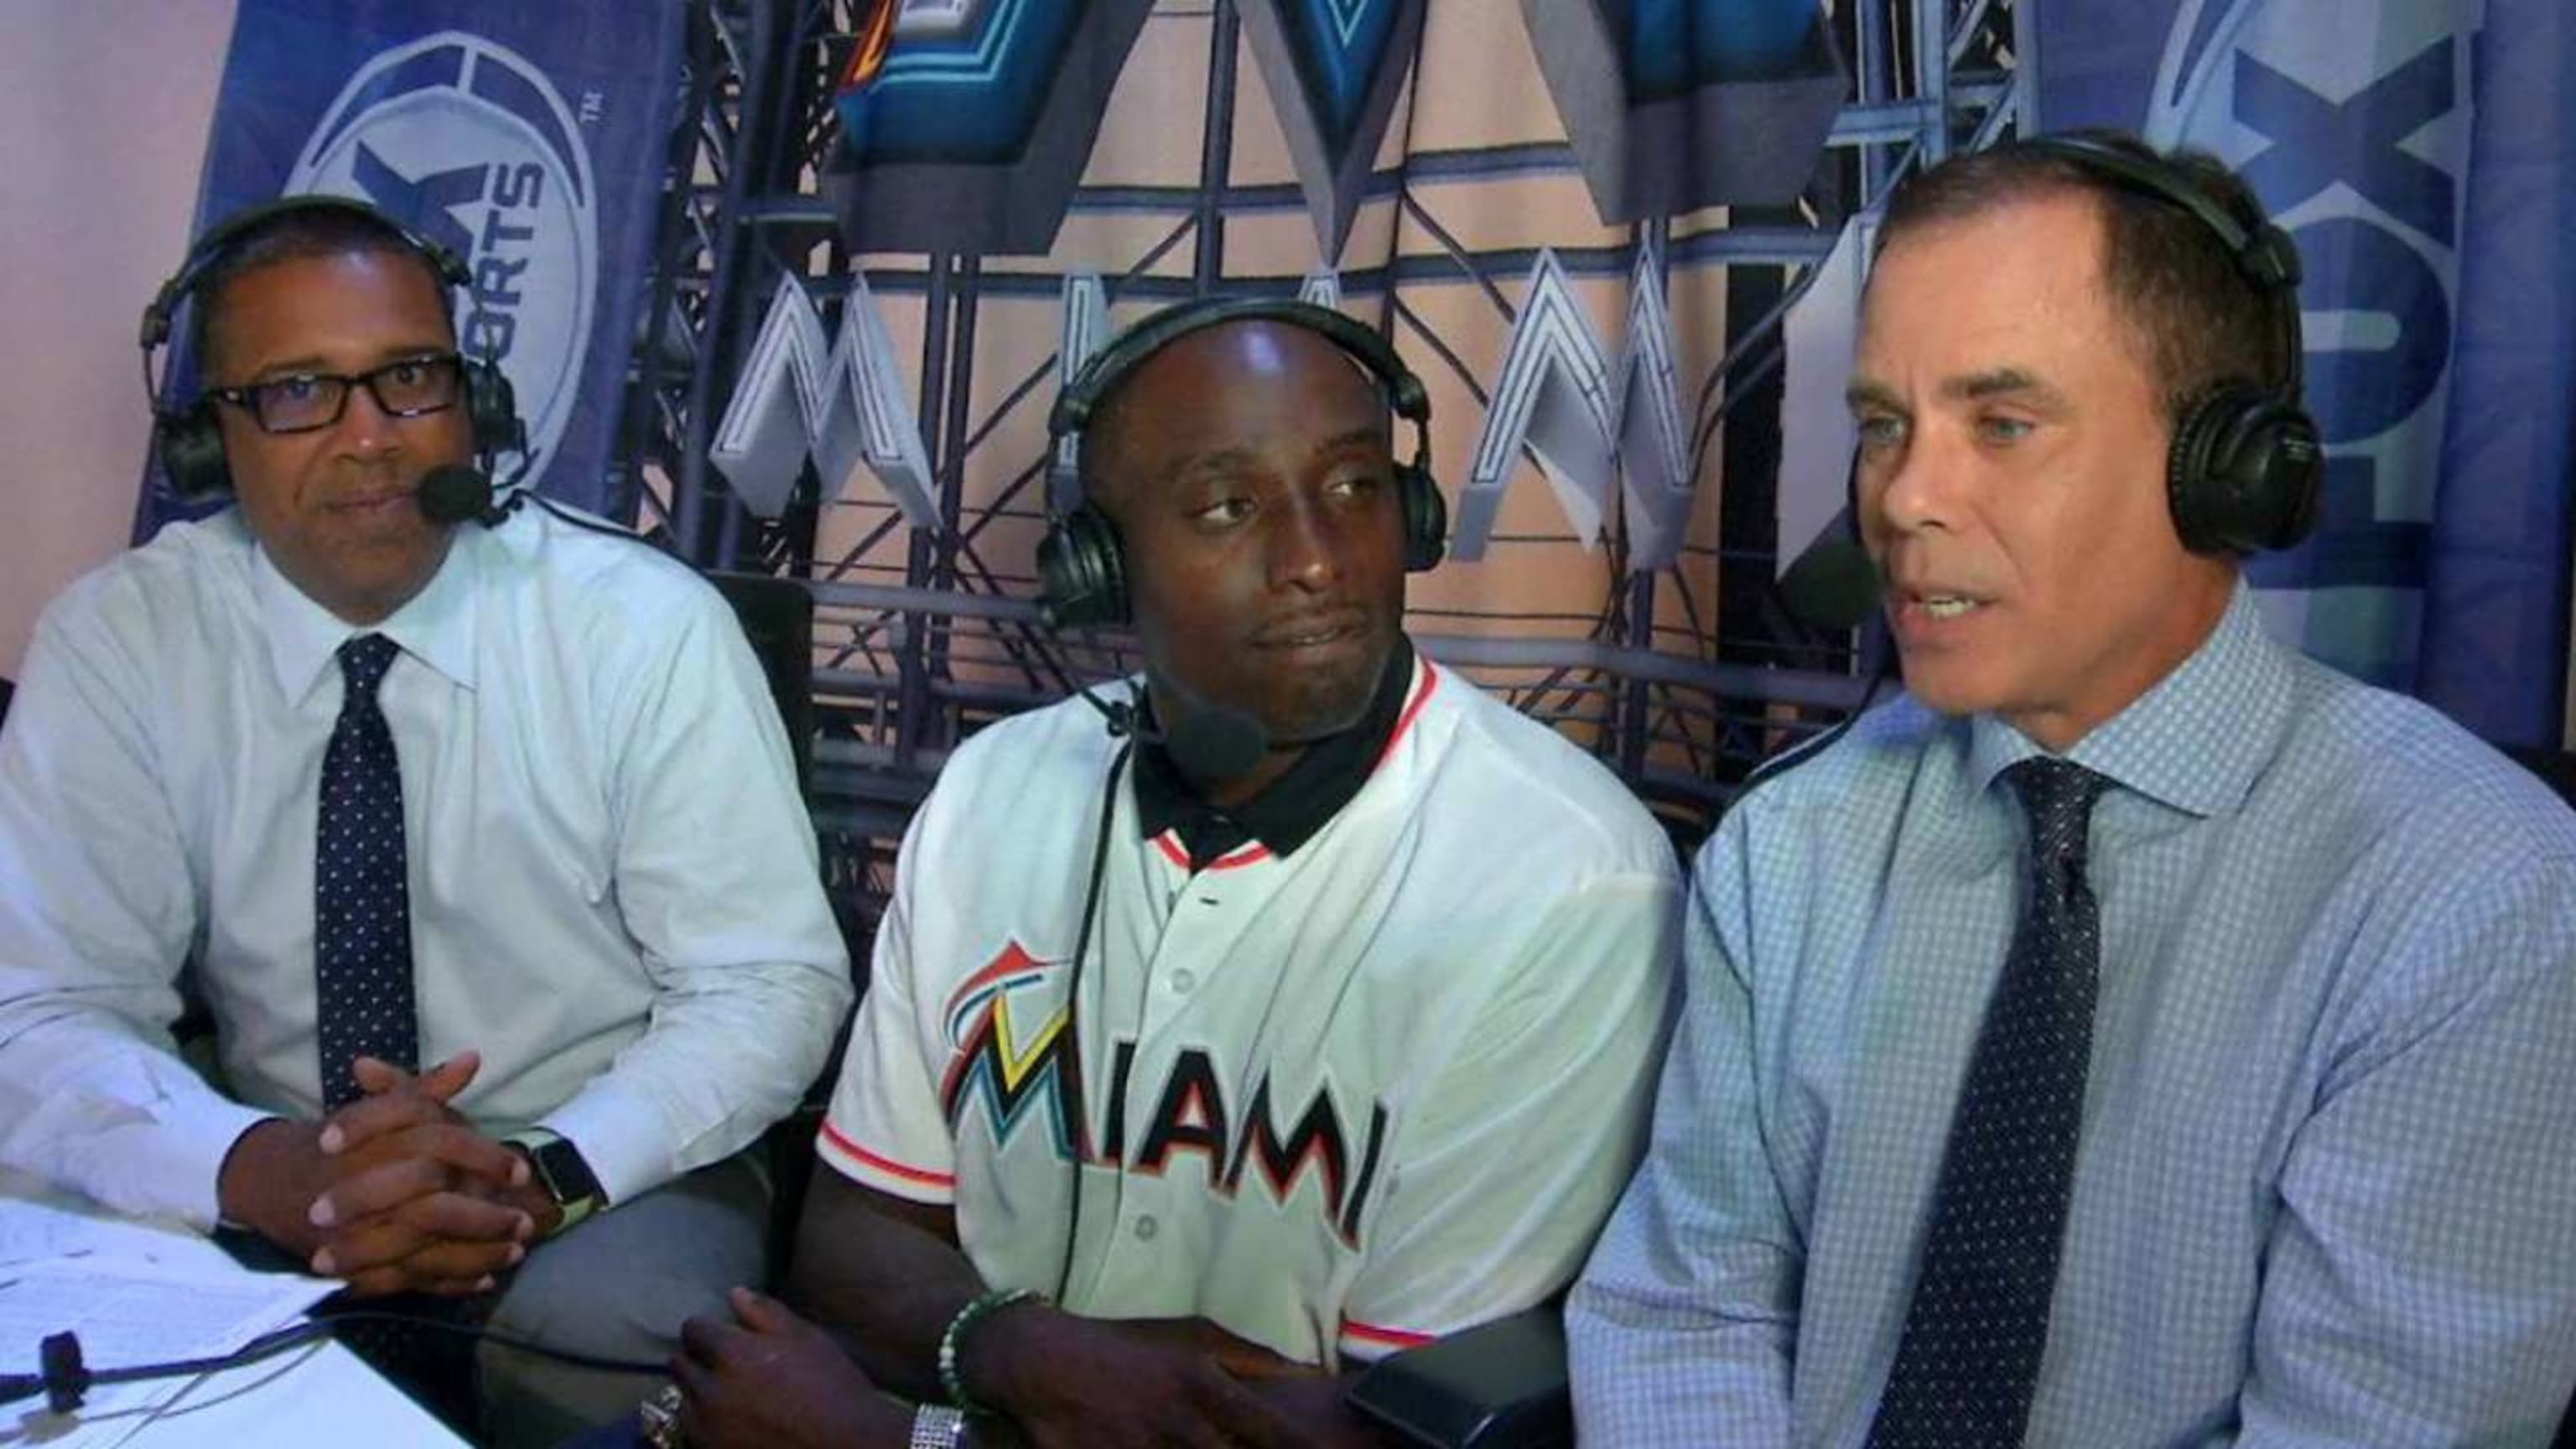 Dontrelle Willis transition from pitcher to broadcaster